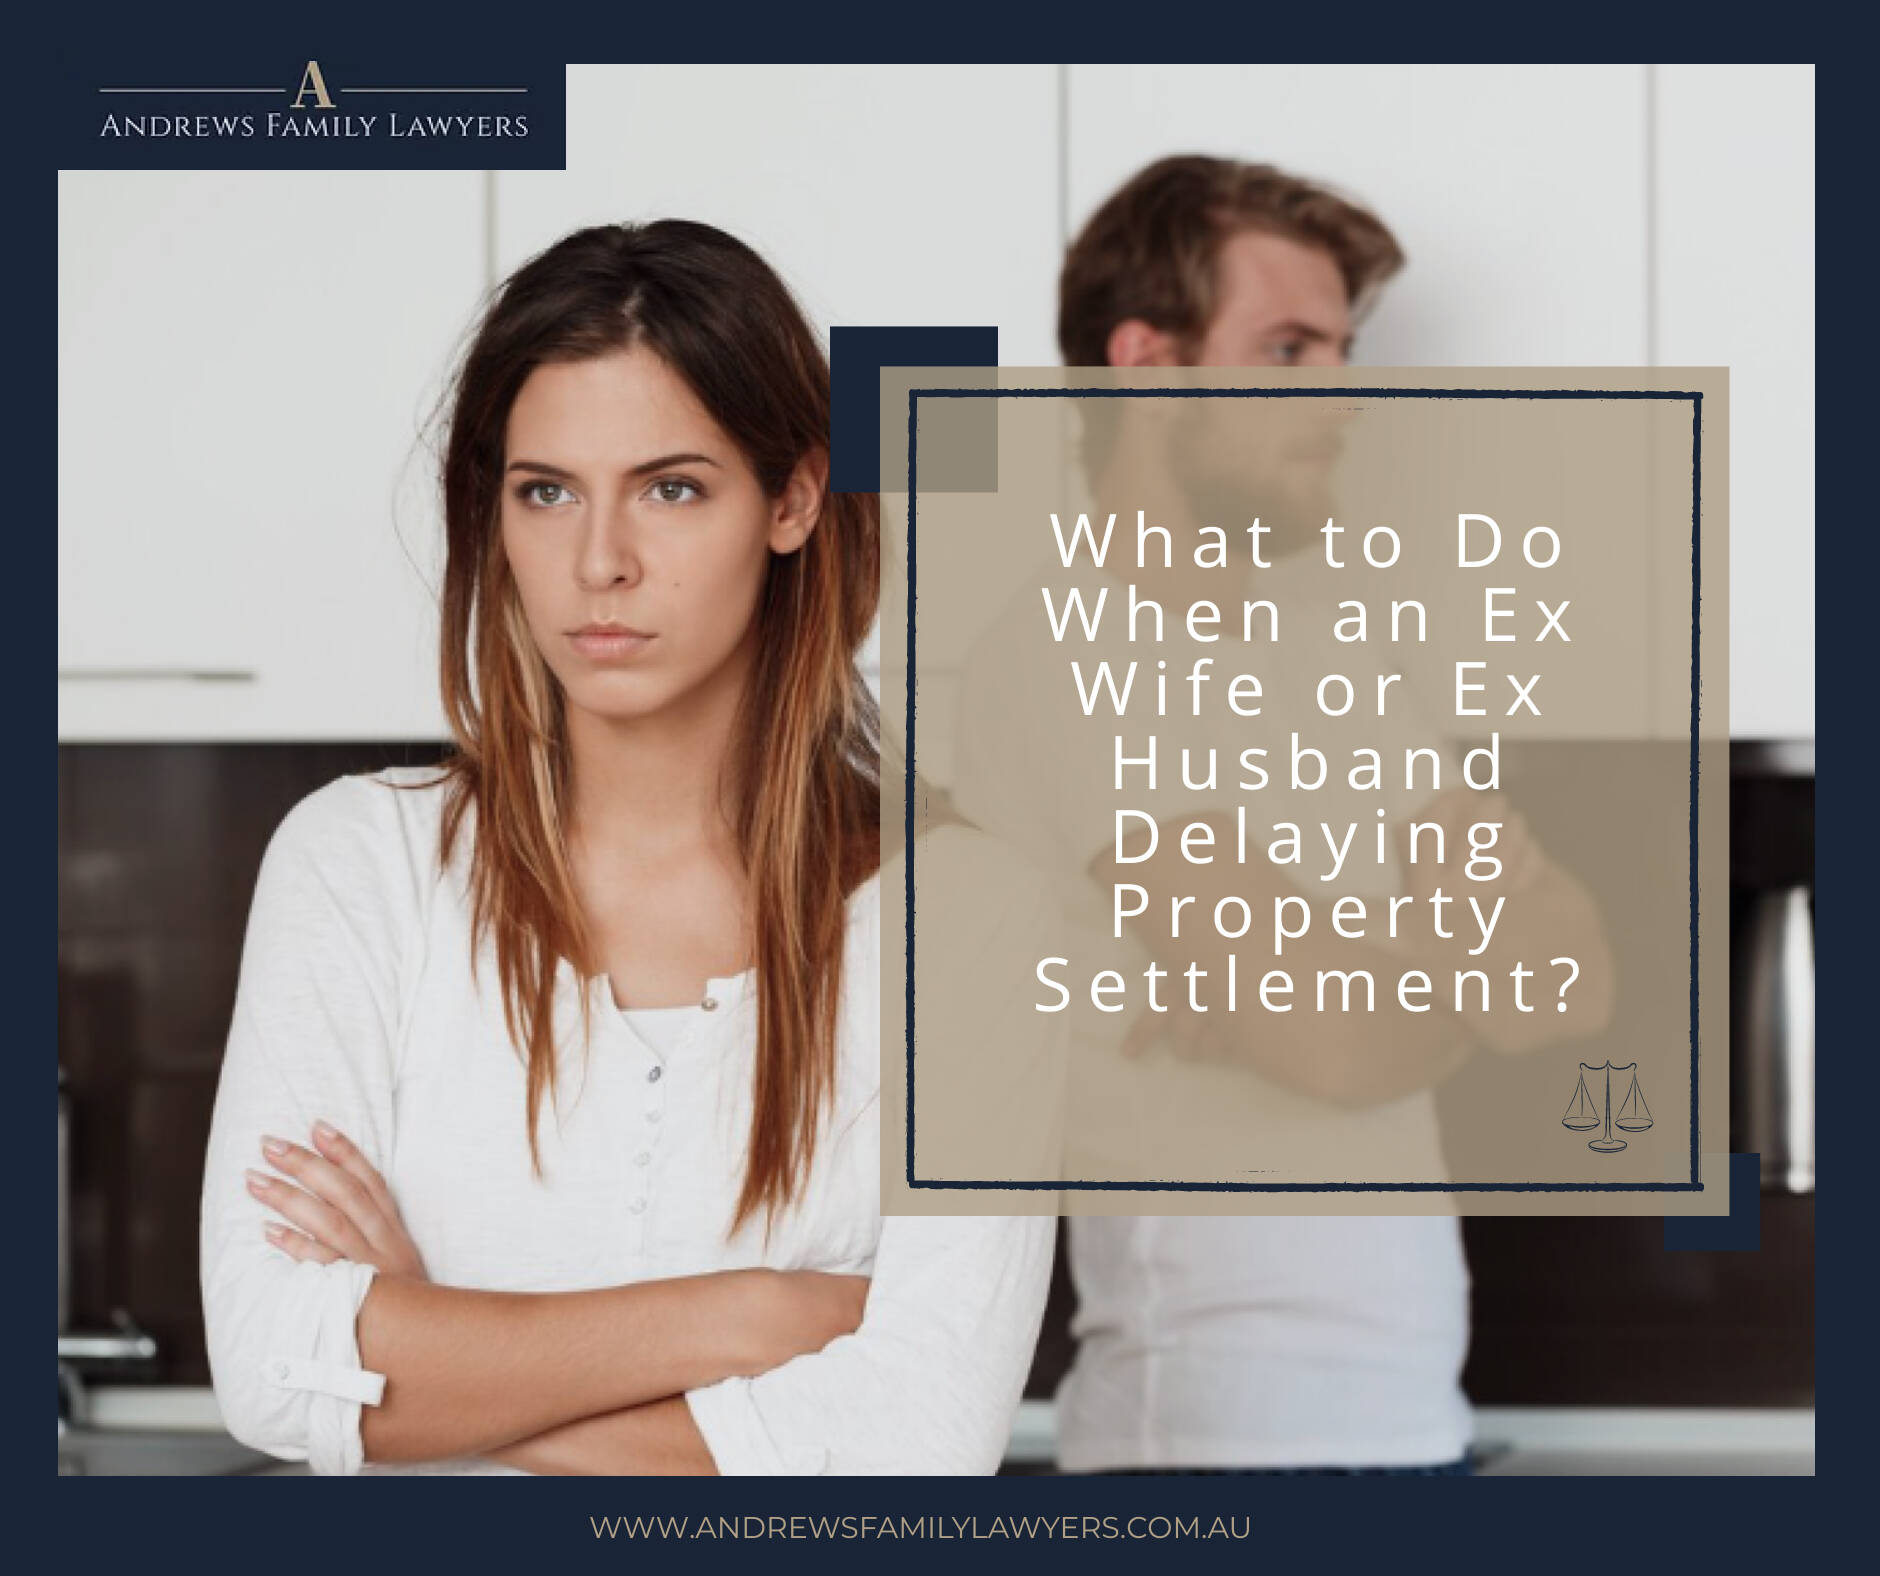 What to Do When an Ex Wife or Ex Husband Delaying Property Settlement?